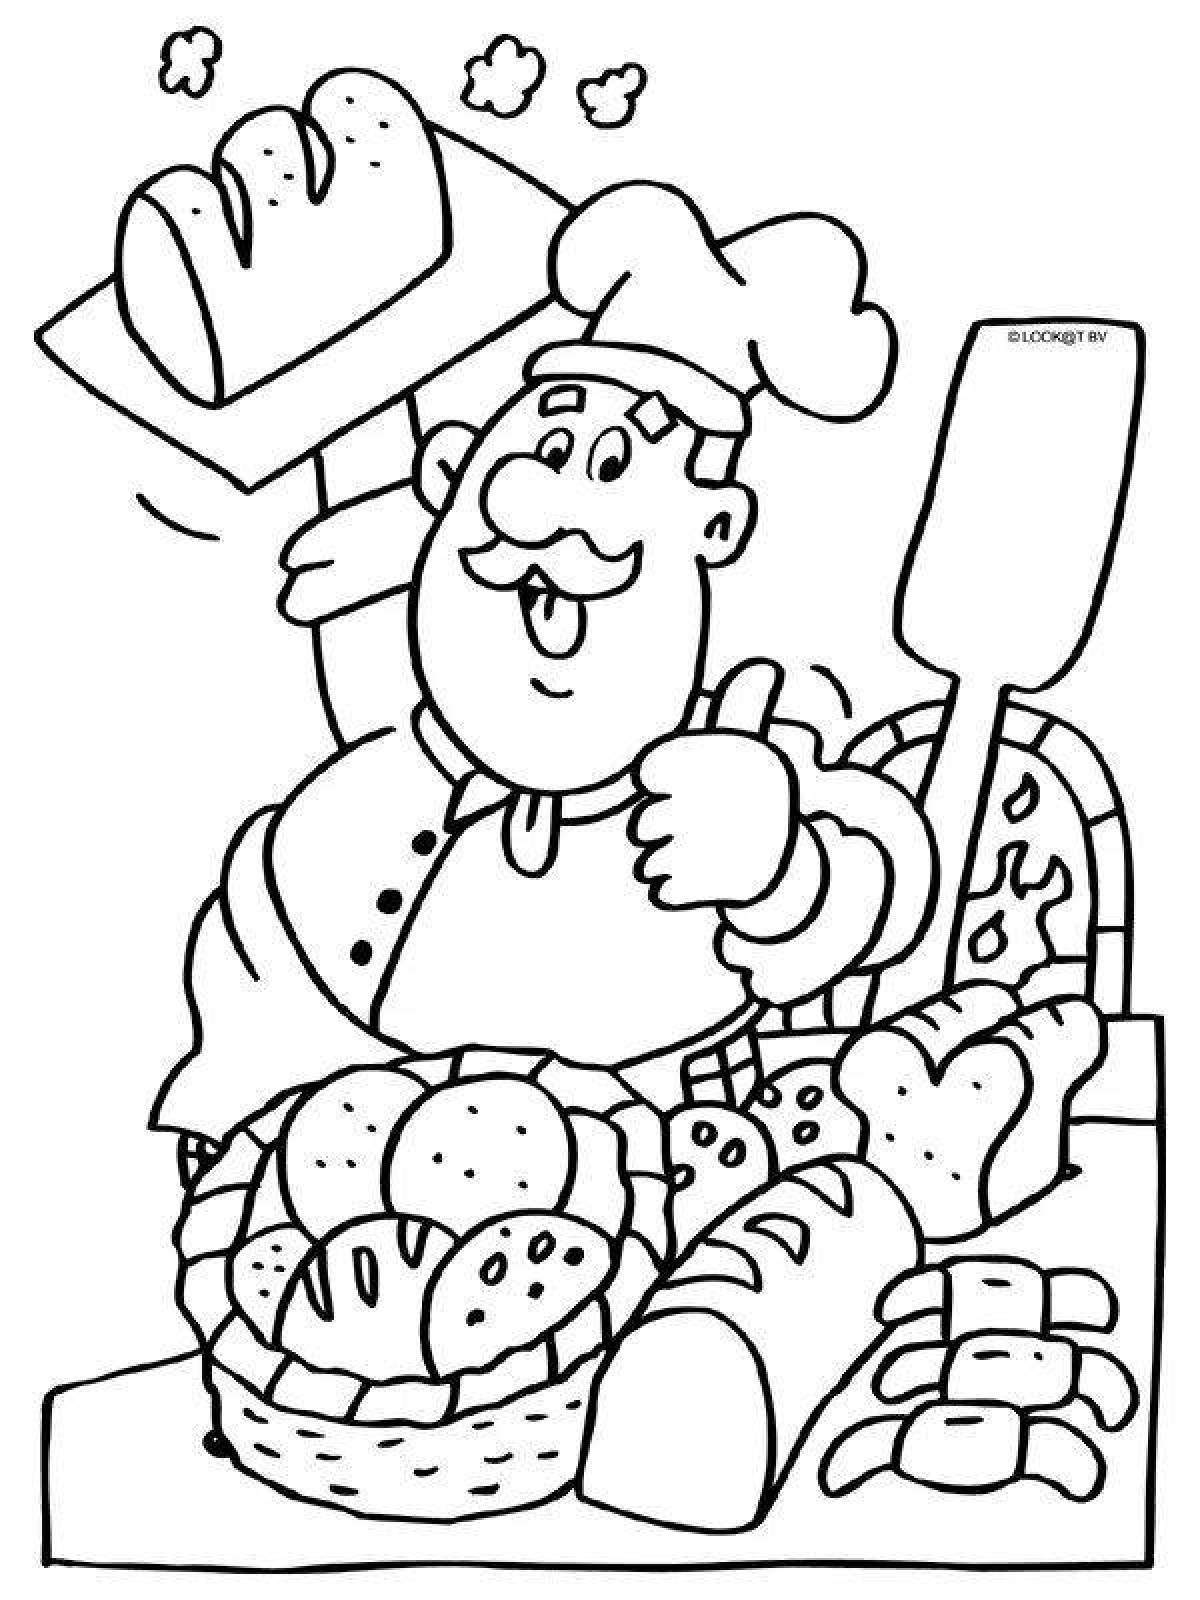 A pastry chef's fun coloring book for kids